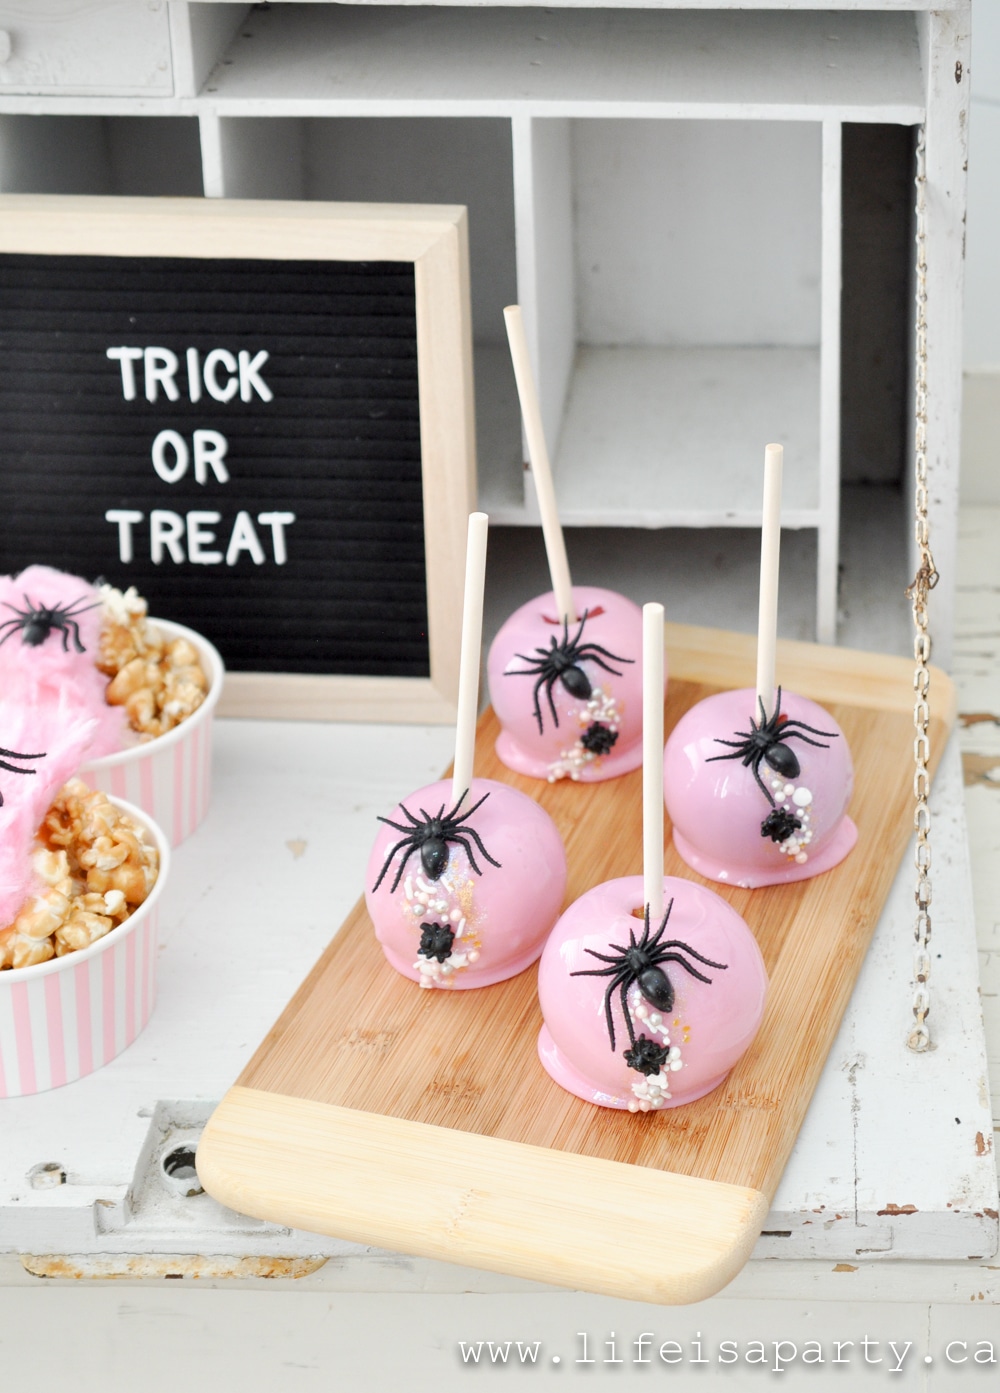 pink candy apples